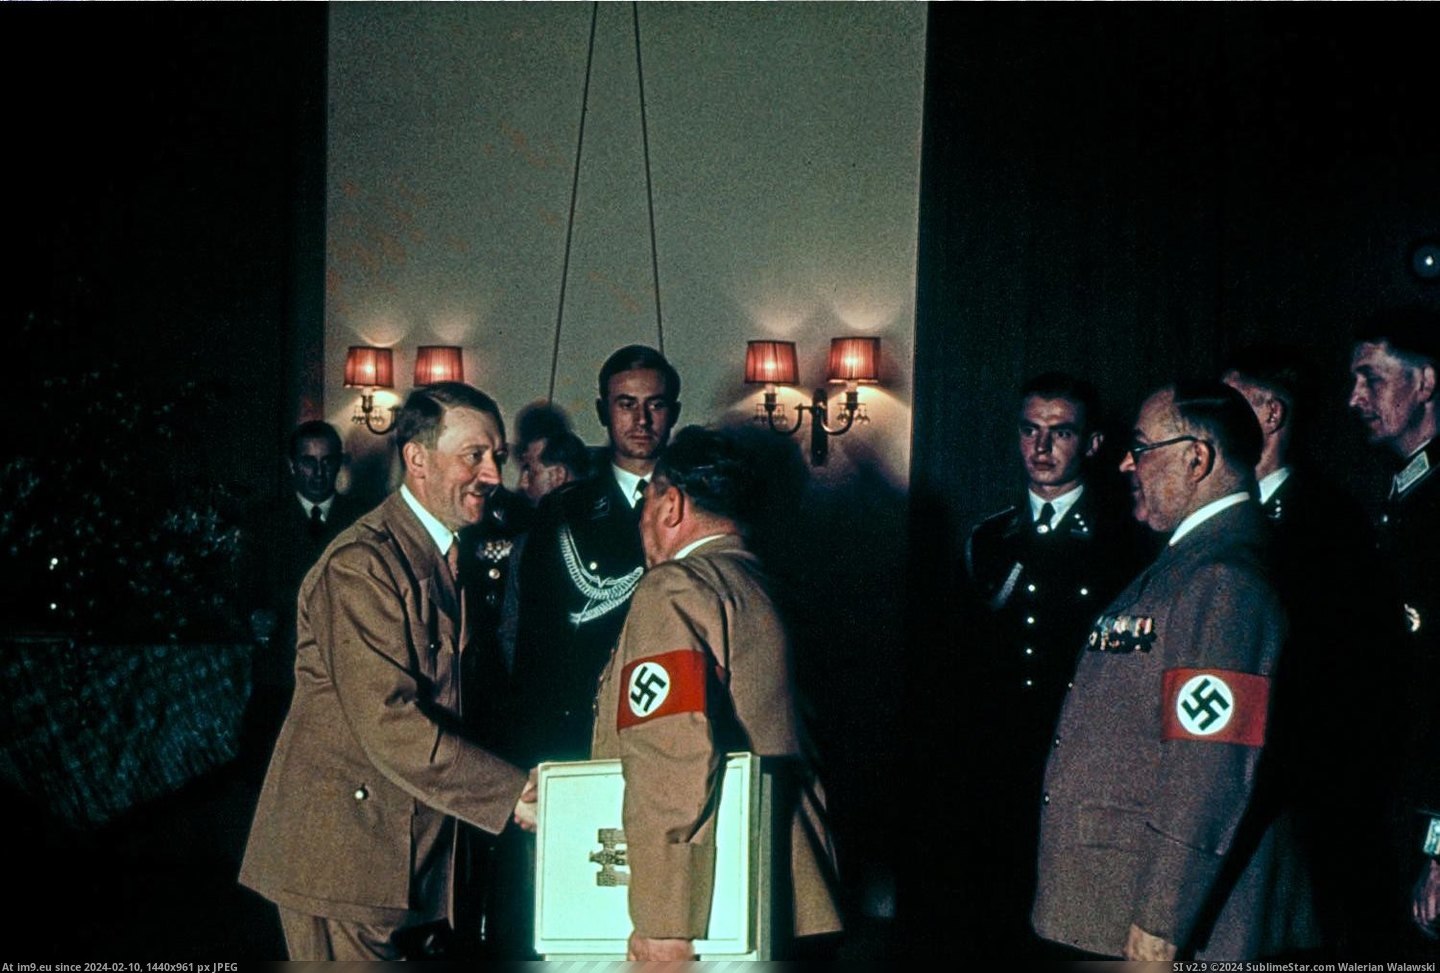 FüHrer Meets Friend 2 (in Historical photos of nazi Germany)